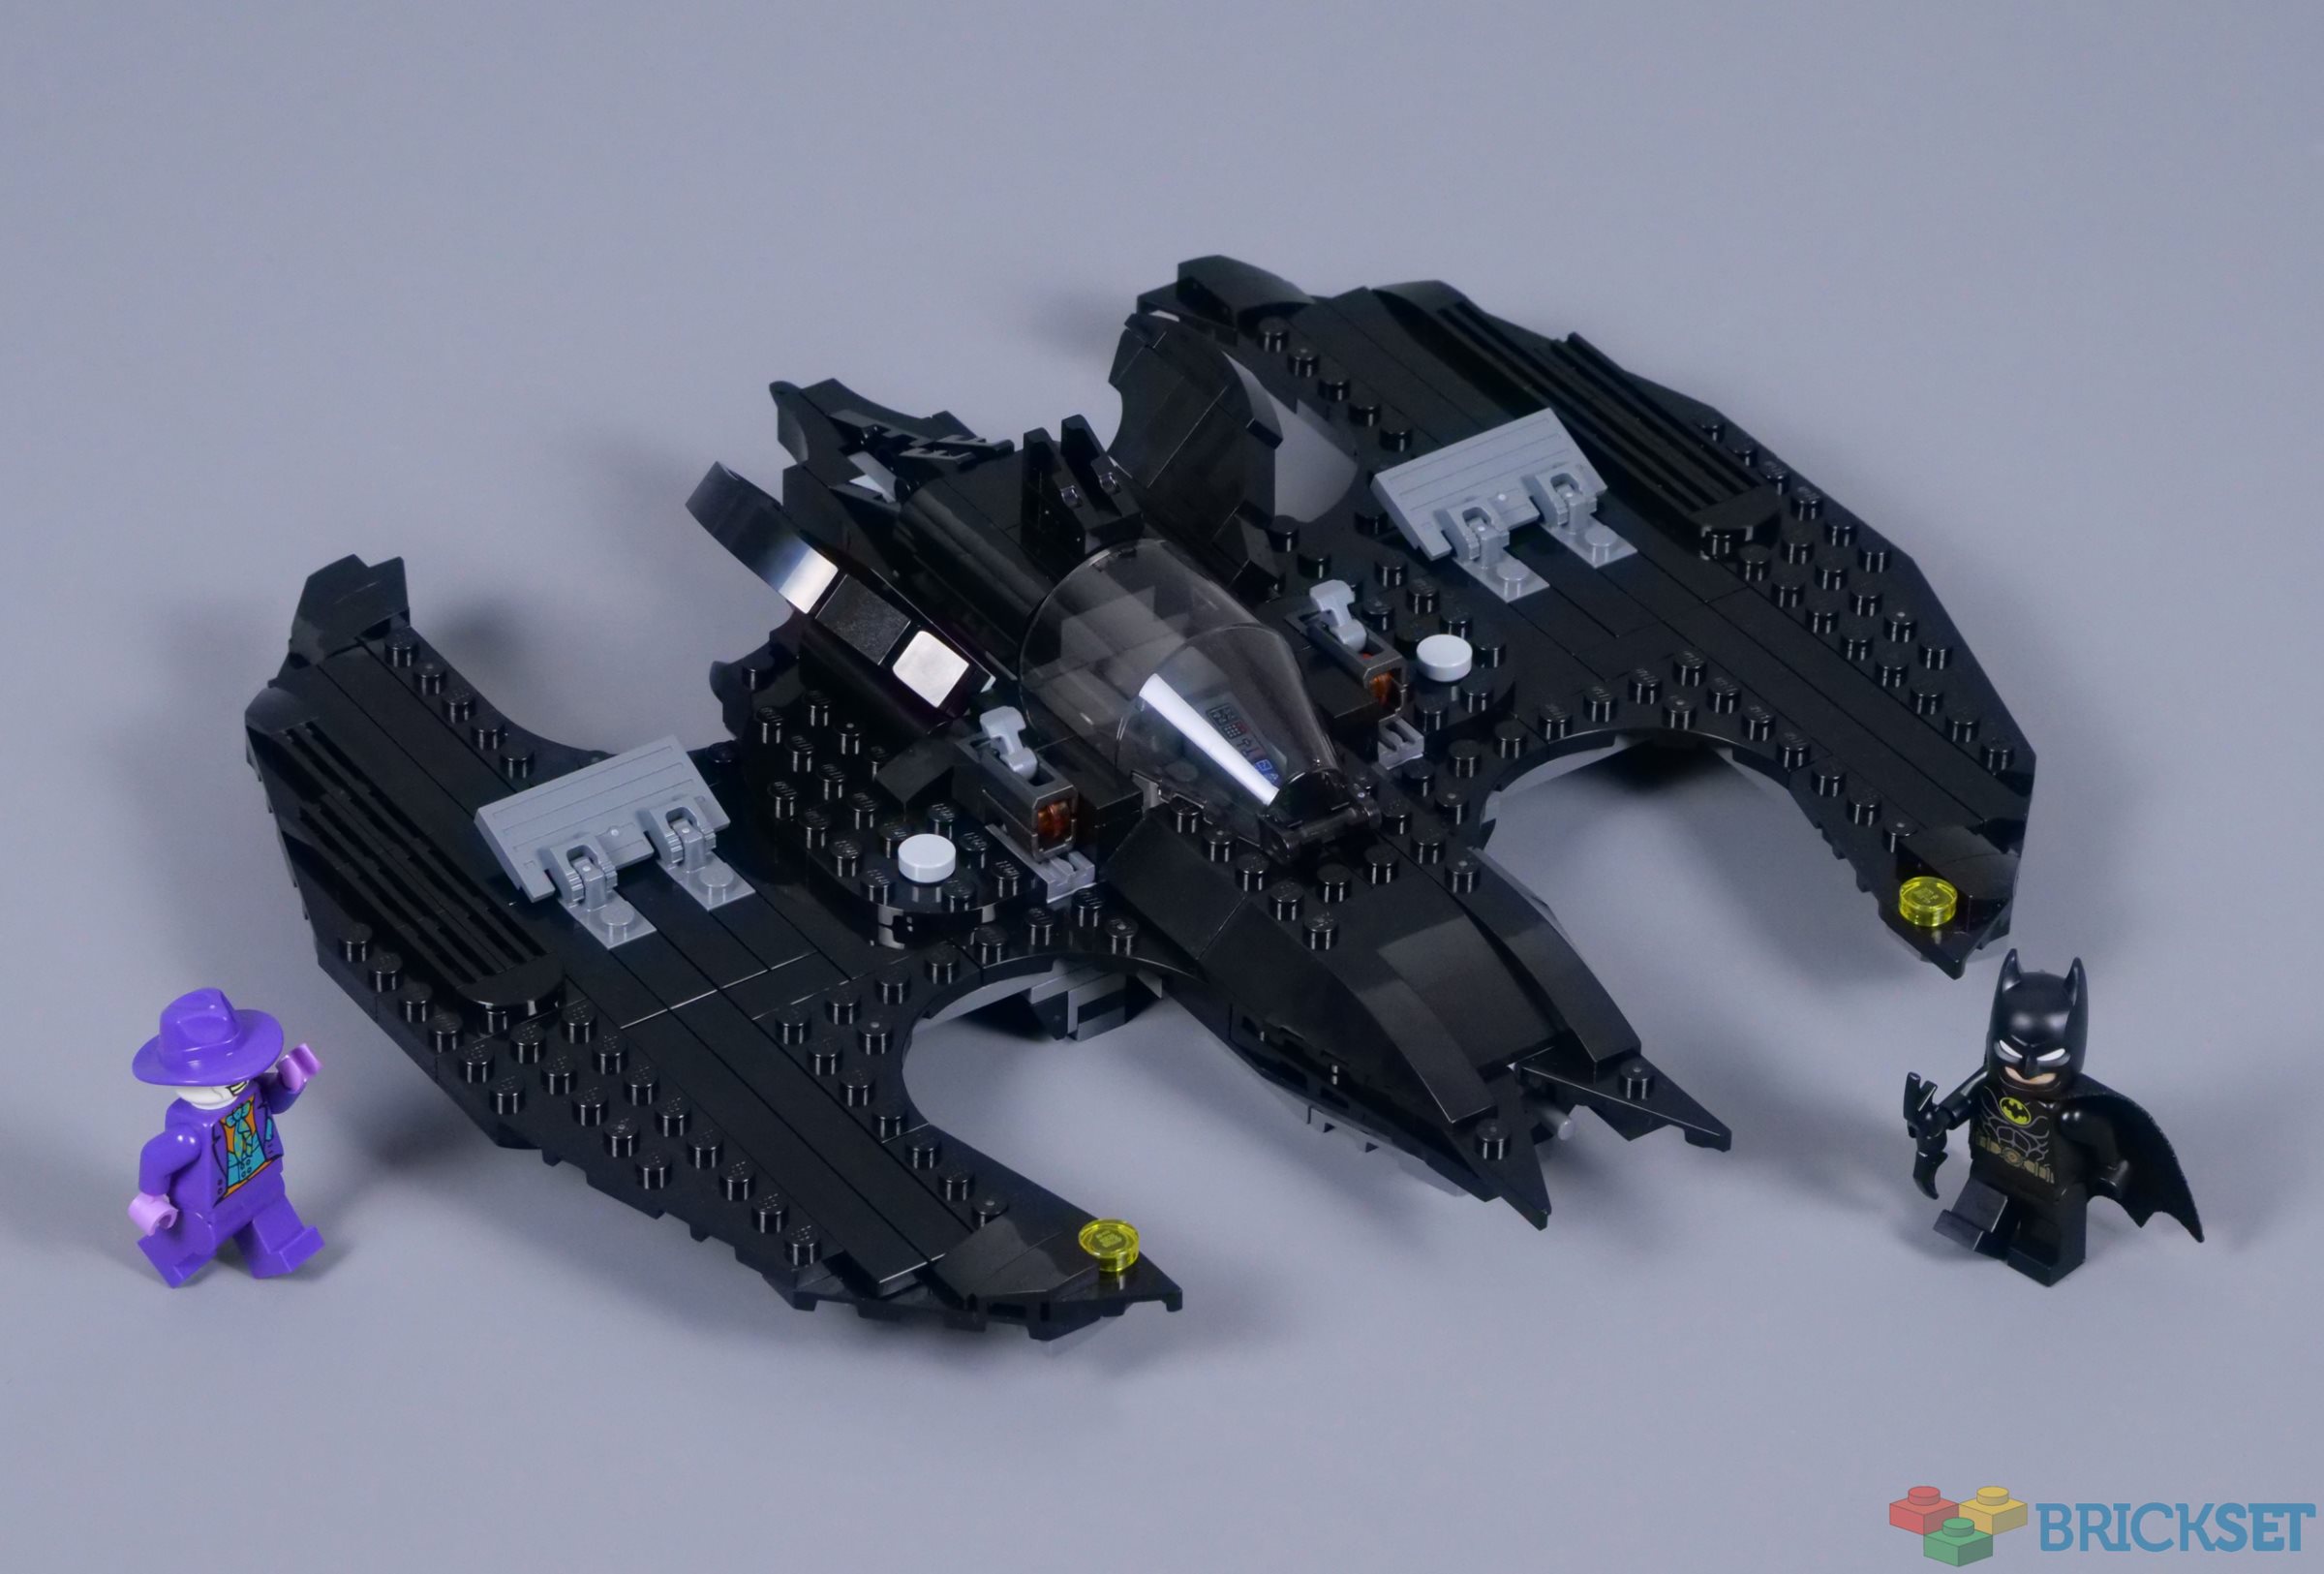 LEGO DC 76265 Batwing Batman vs. The Joker [REVIEW] - The Brothers